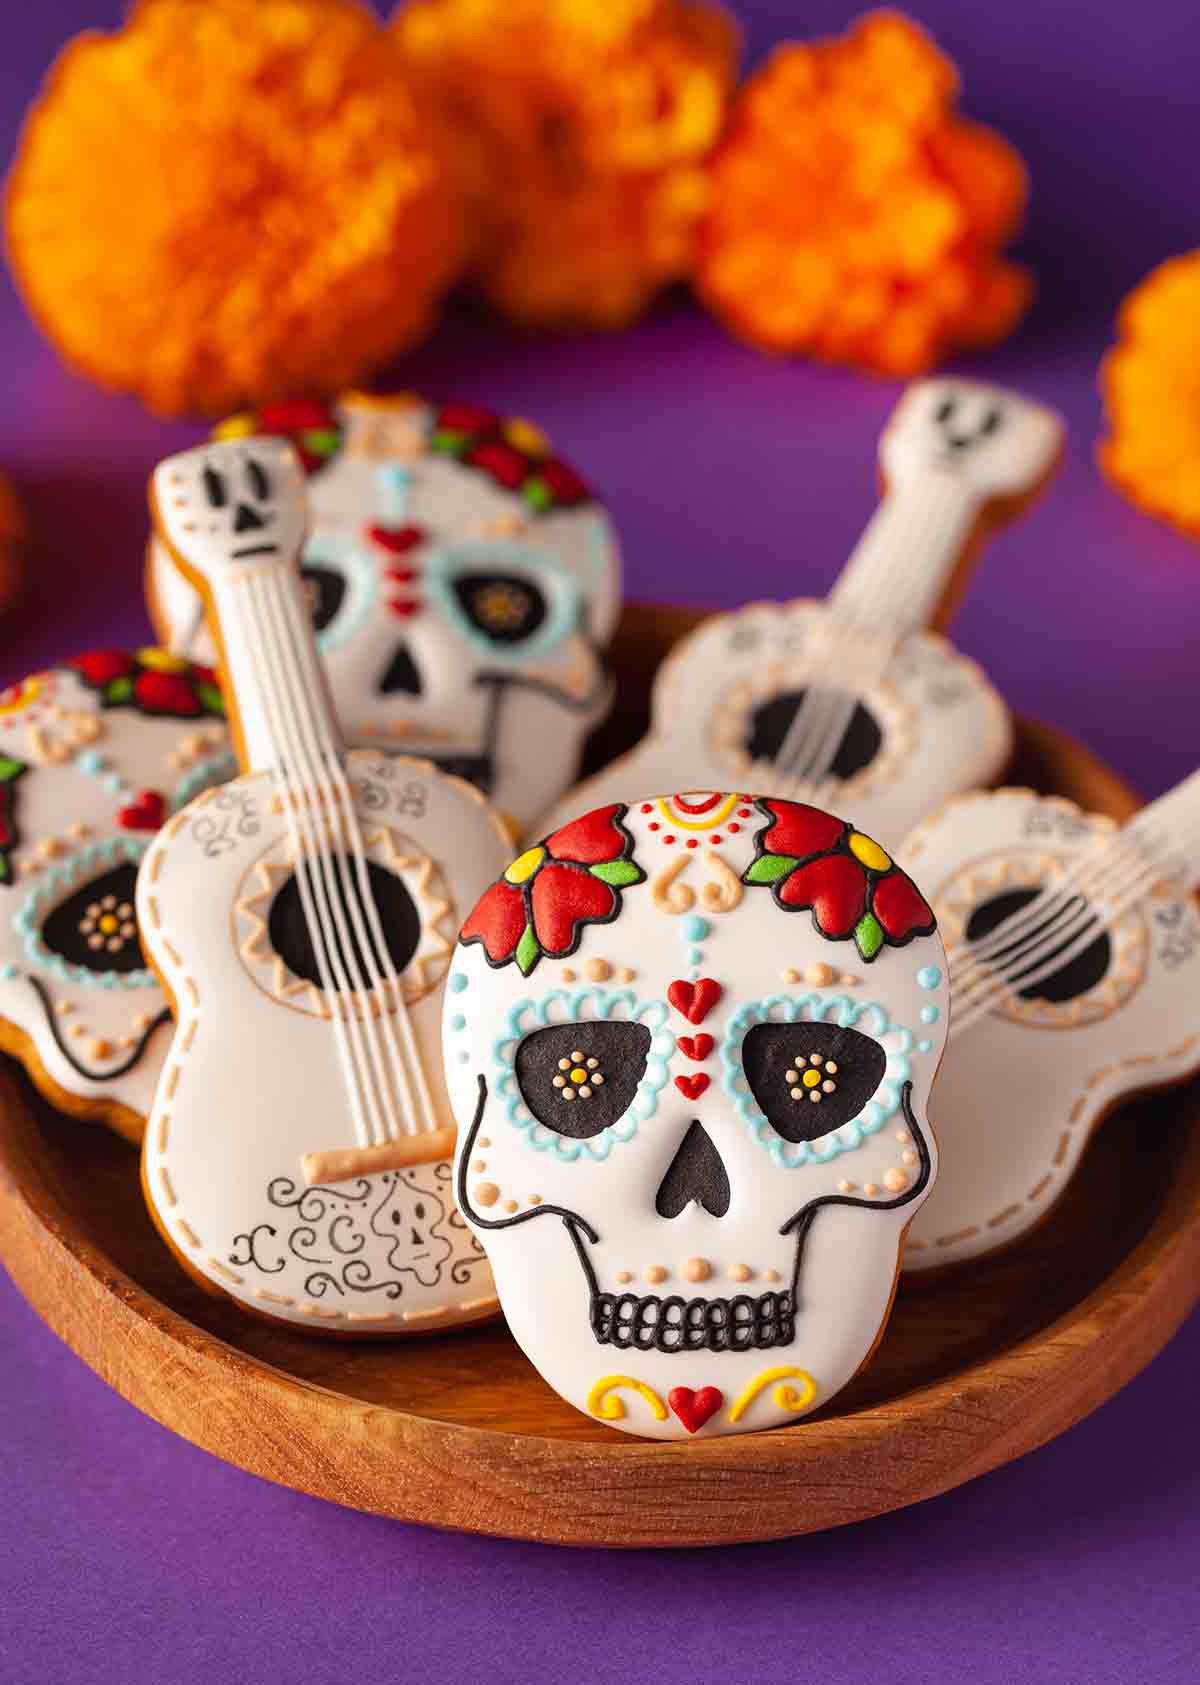 A platter of decorated Day of the Dead cookies and decorated guitar cookies.